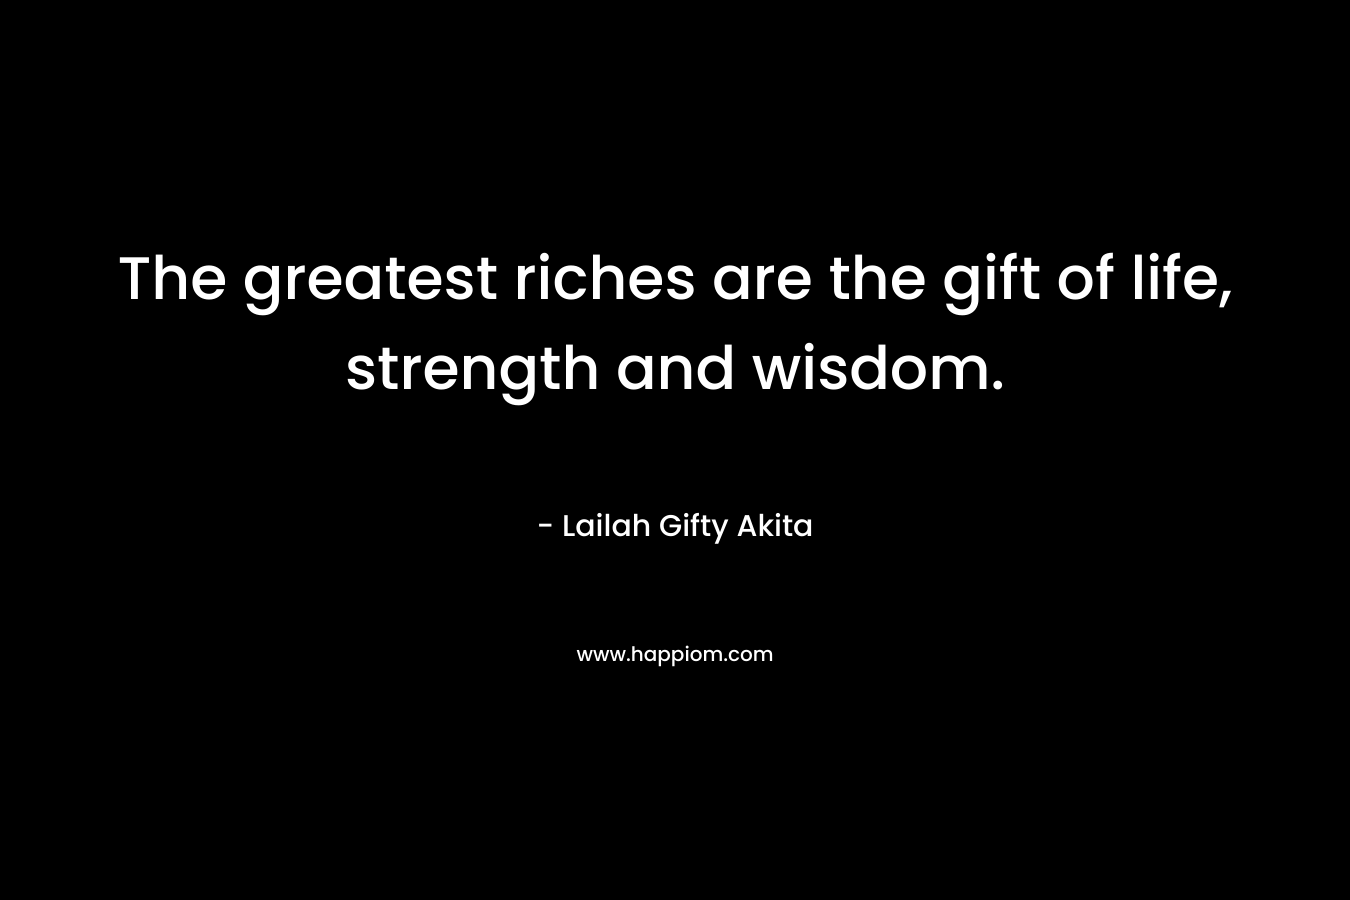 The greatest riches are the gift of life, strength and wisdom.